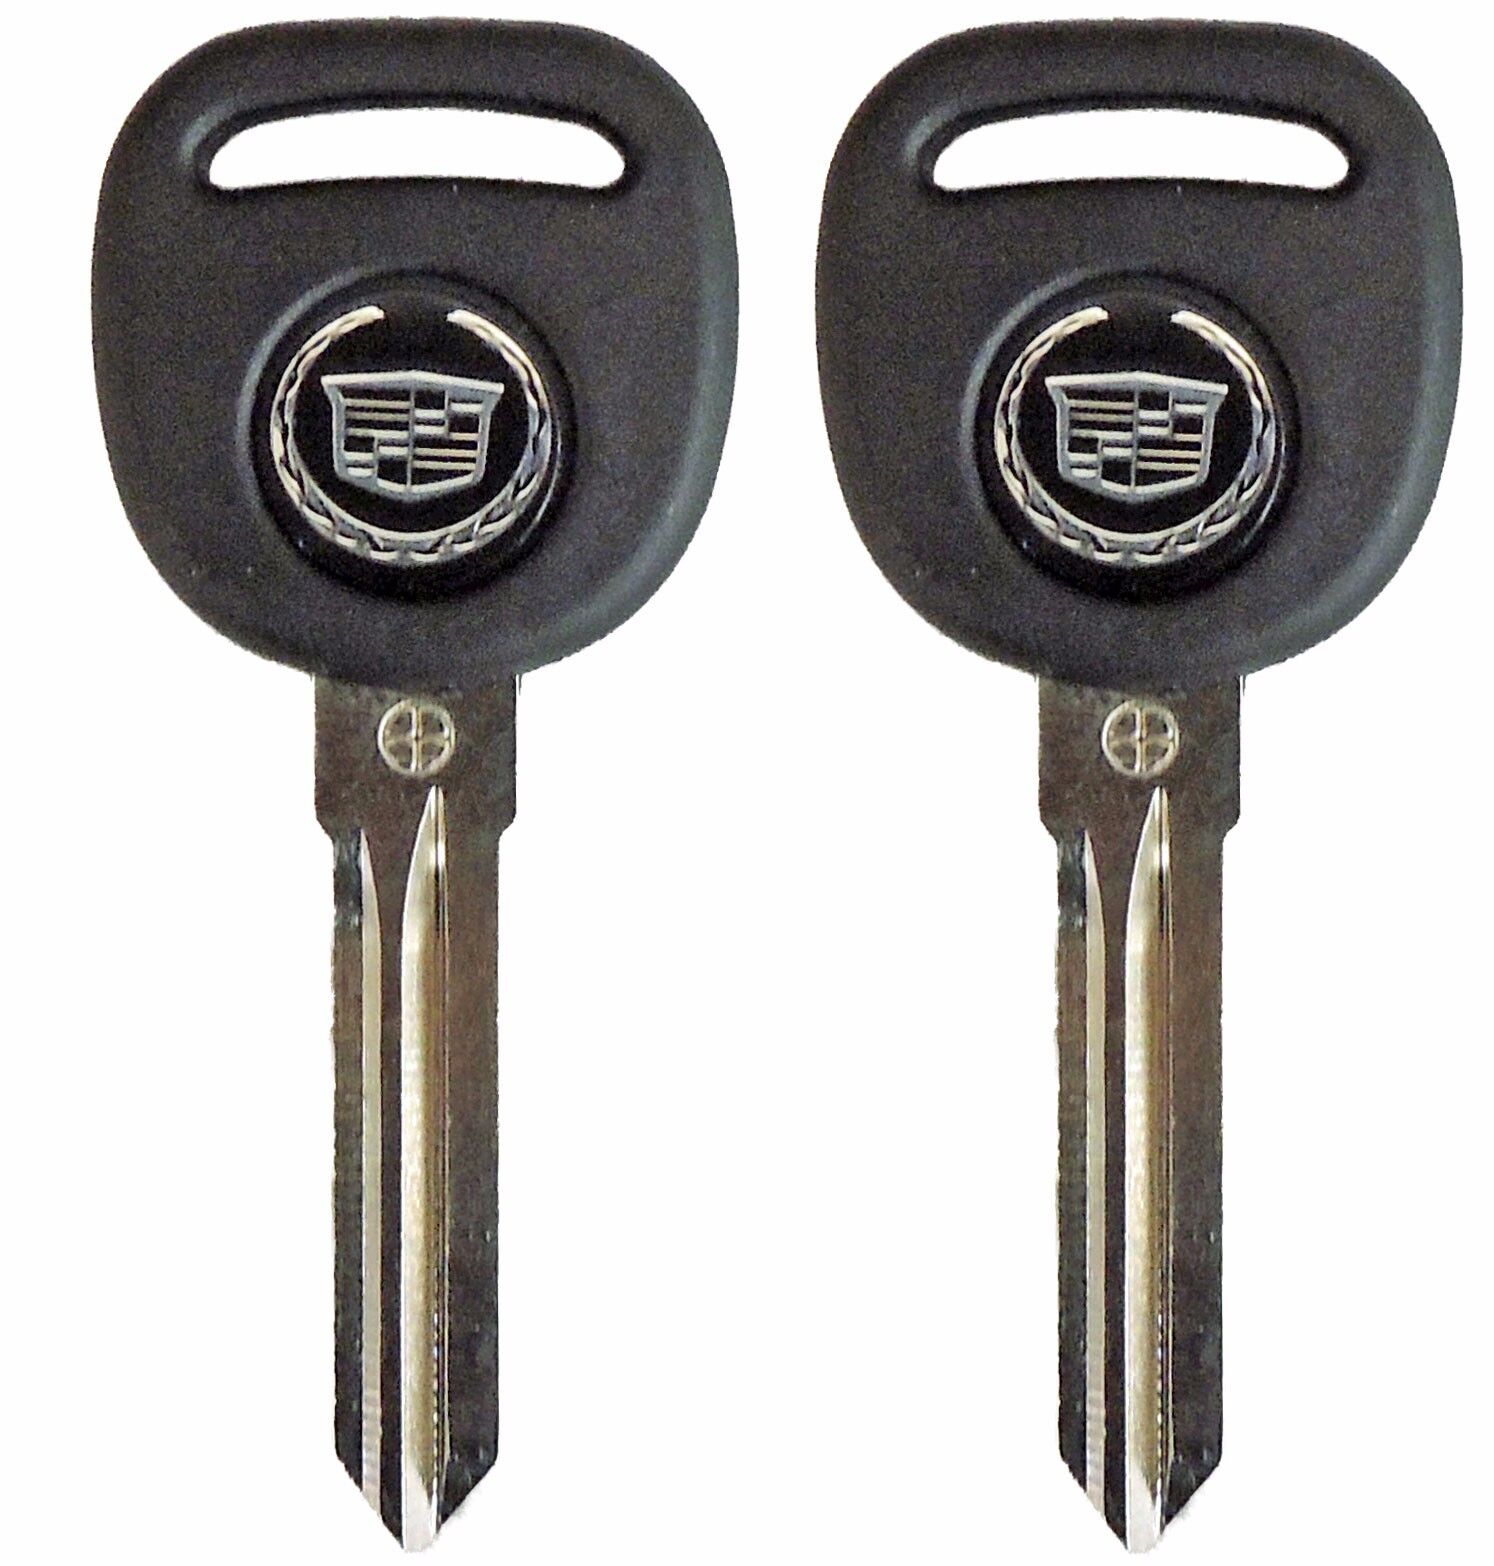 2 Circle Plus Transponder Chip Keys for Cadillac Escalade CTS DTS with logo.